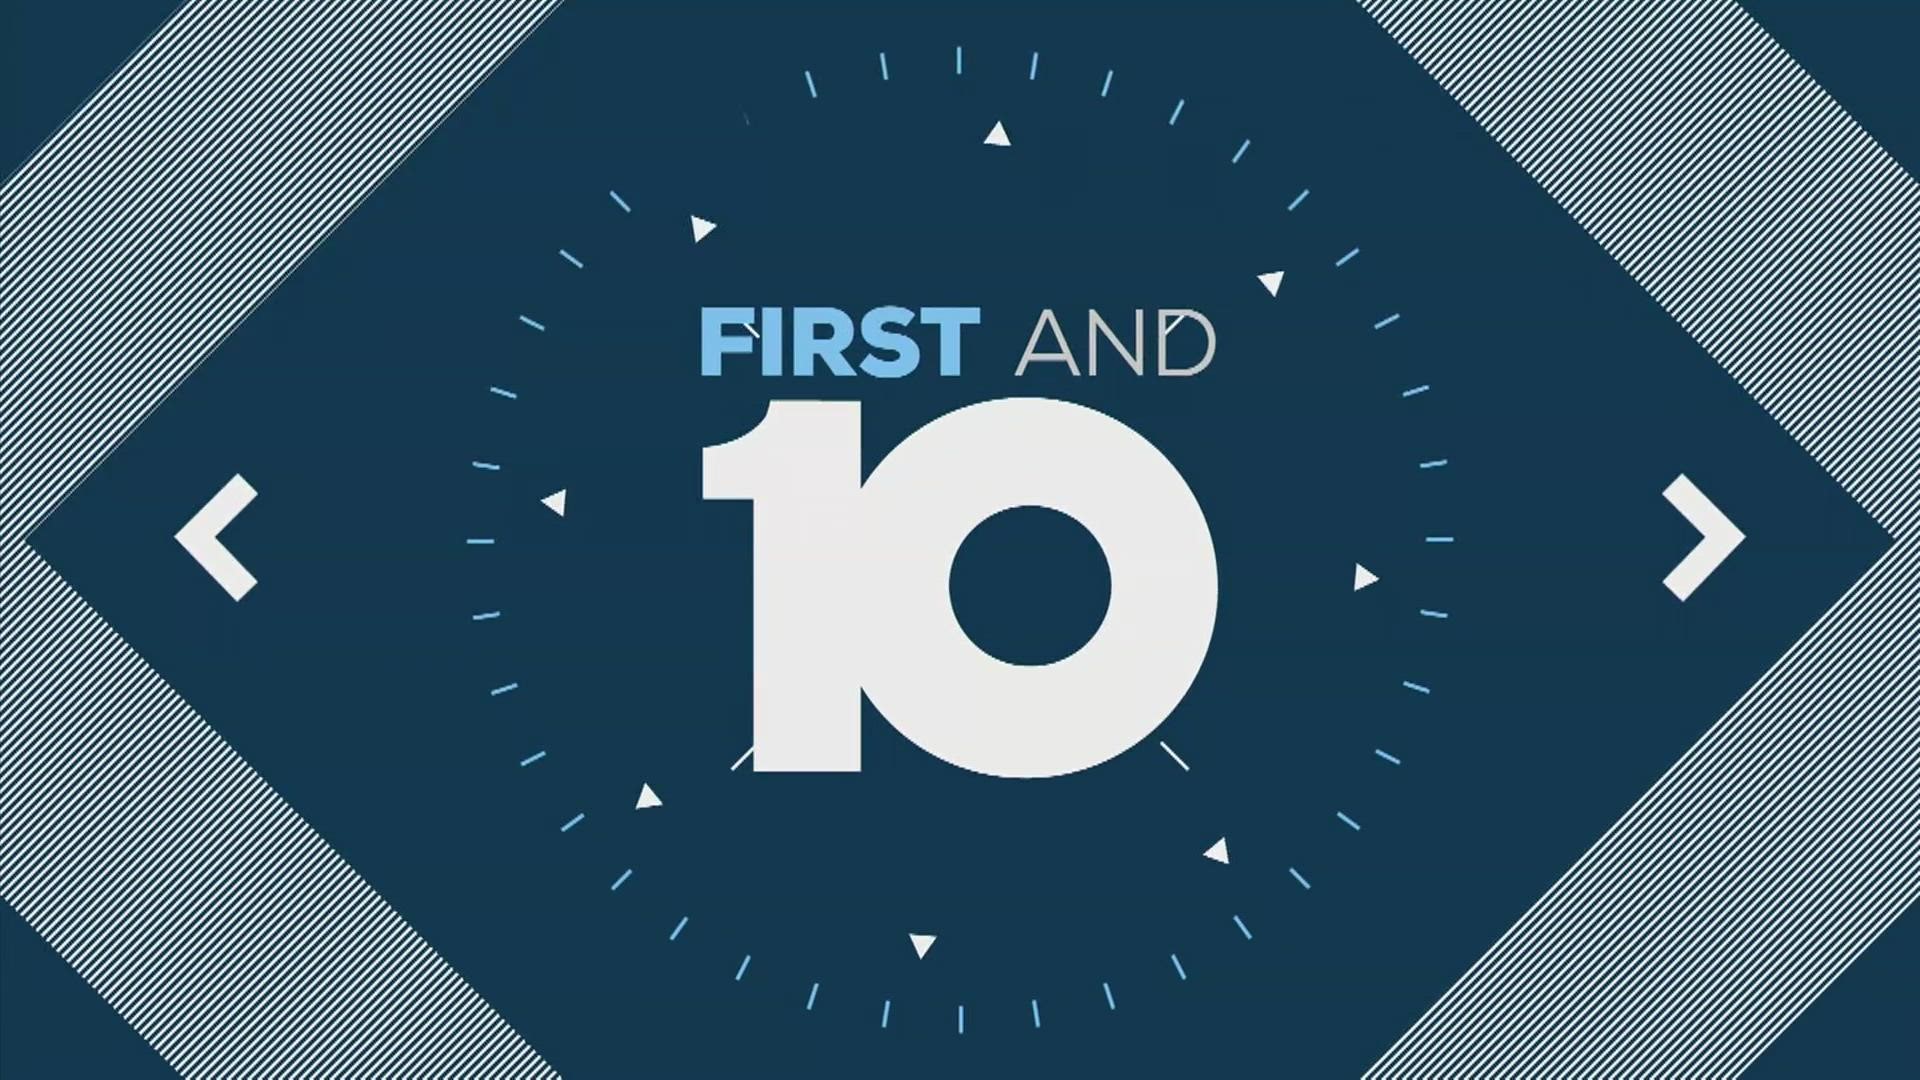 Watch First & 10 starting at 11:15 p.m. on Friday.